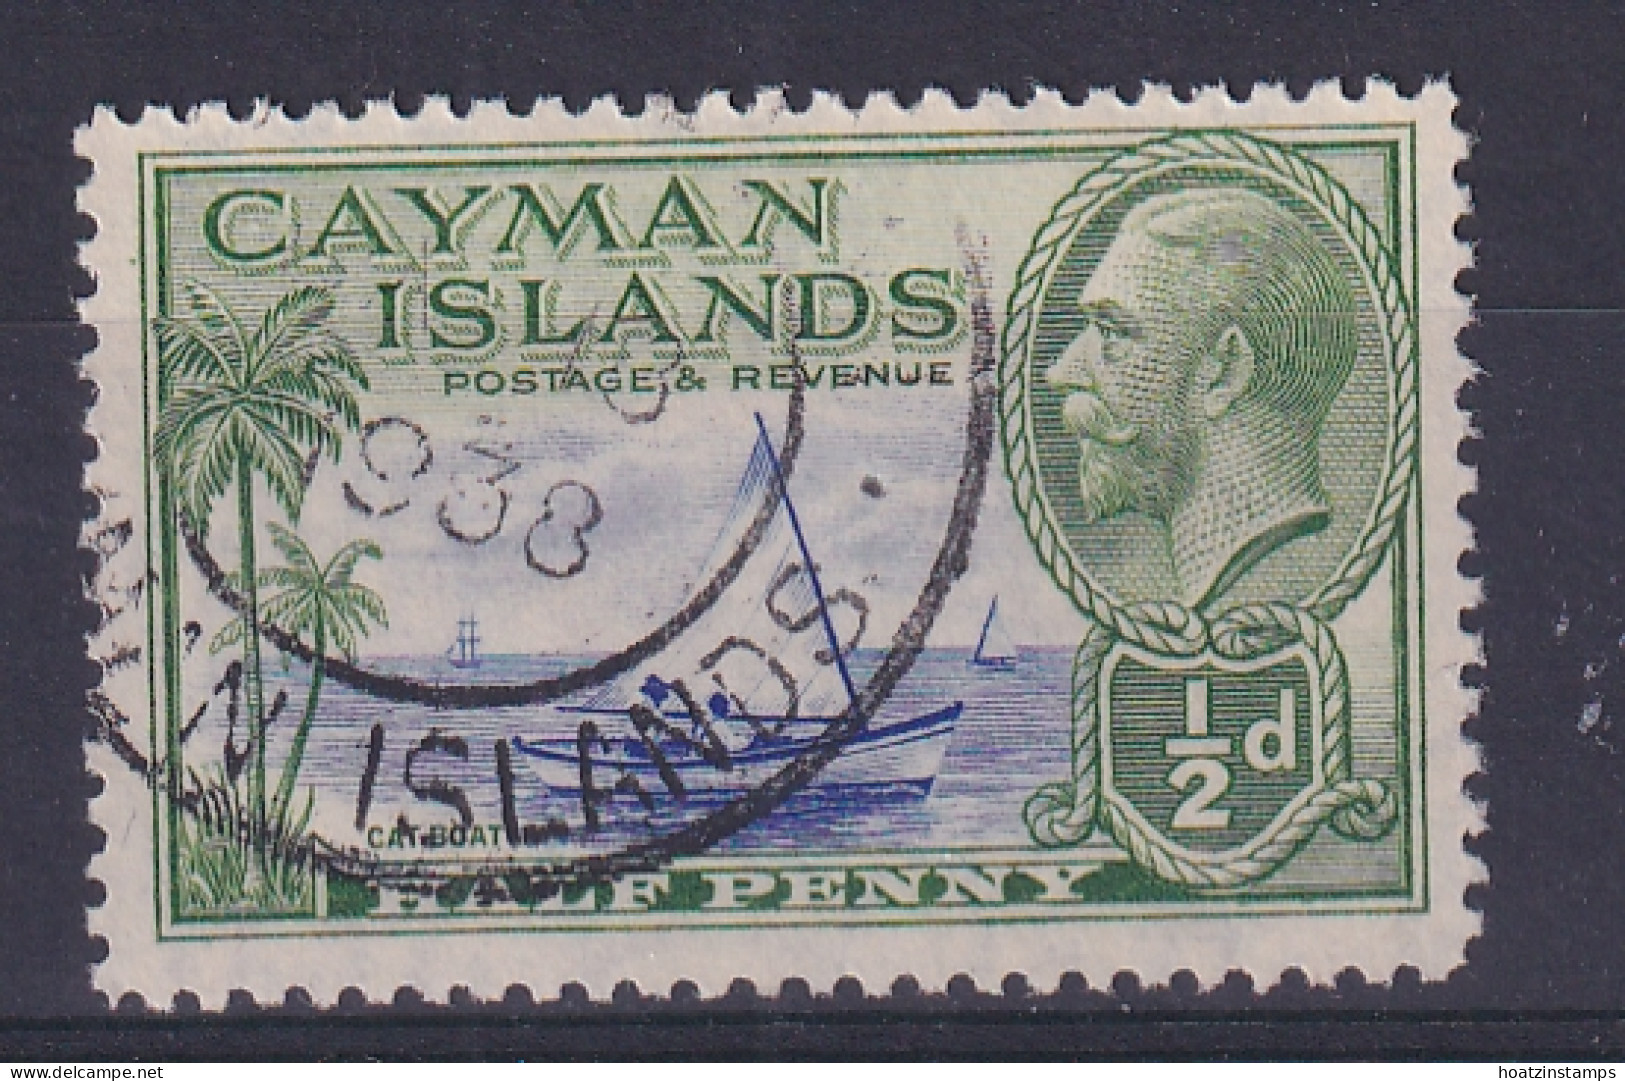 Cayman Islands: 1935   KGV - Pictorial   SG97   ½d     Used - Kaimaninseln